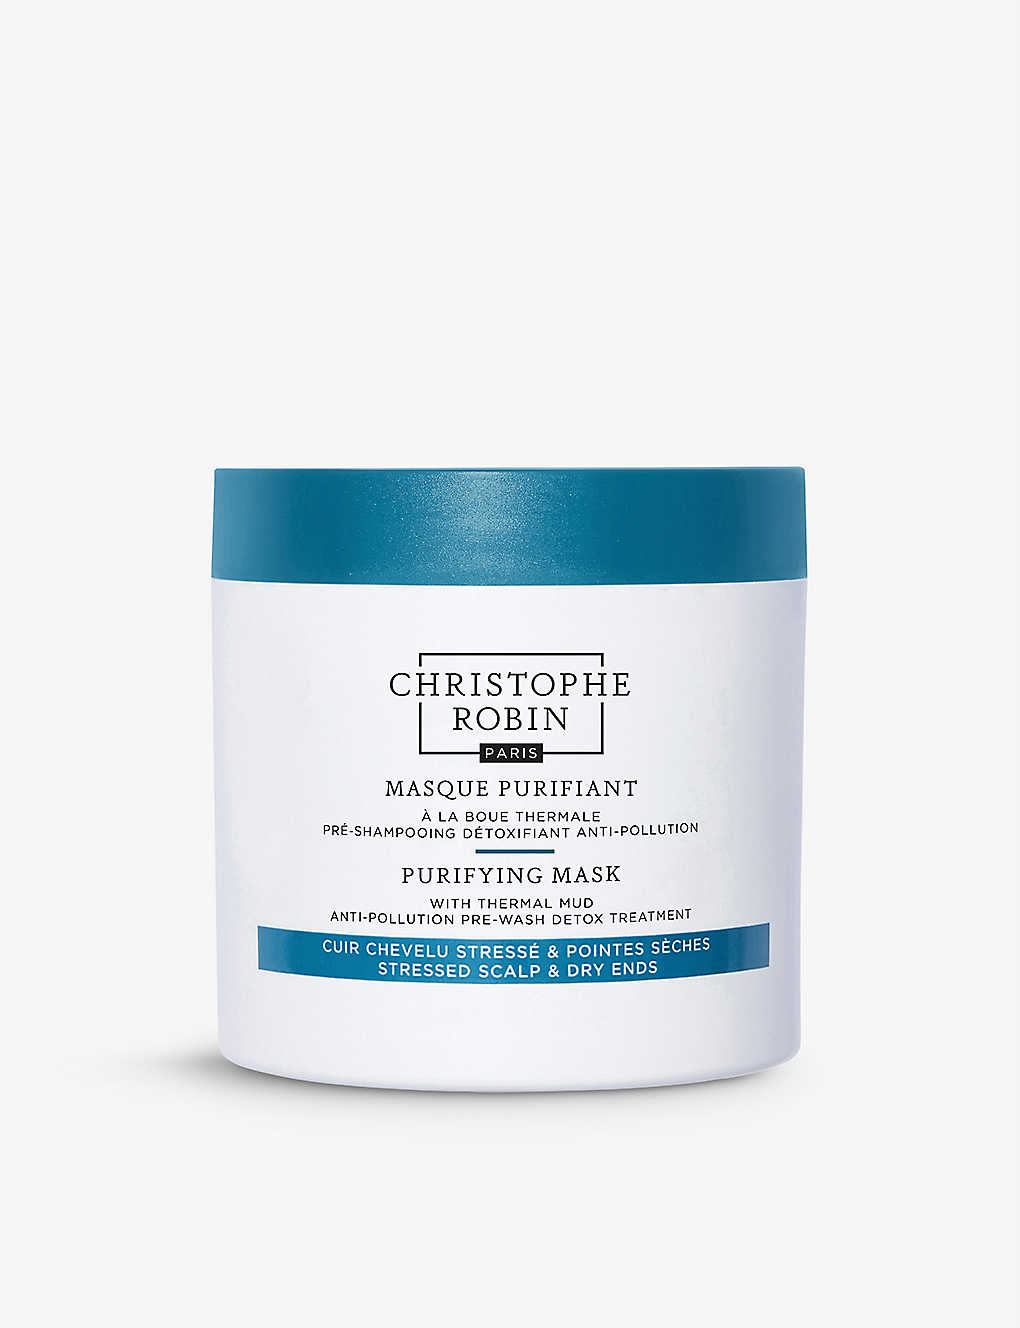 Christophe Robin Purifying Mask With Thermal Mud Hair Mask